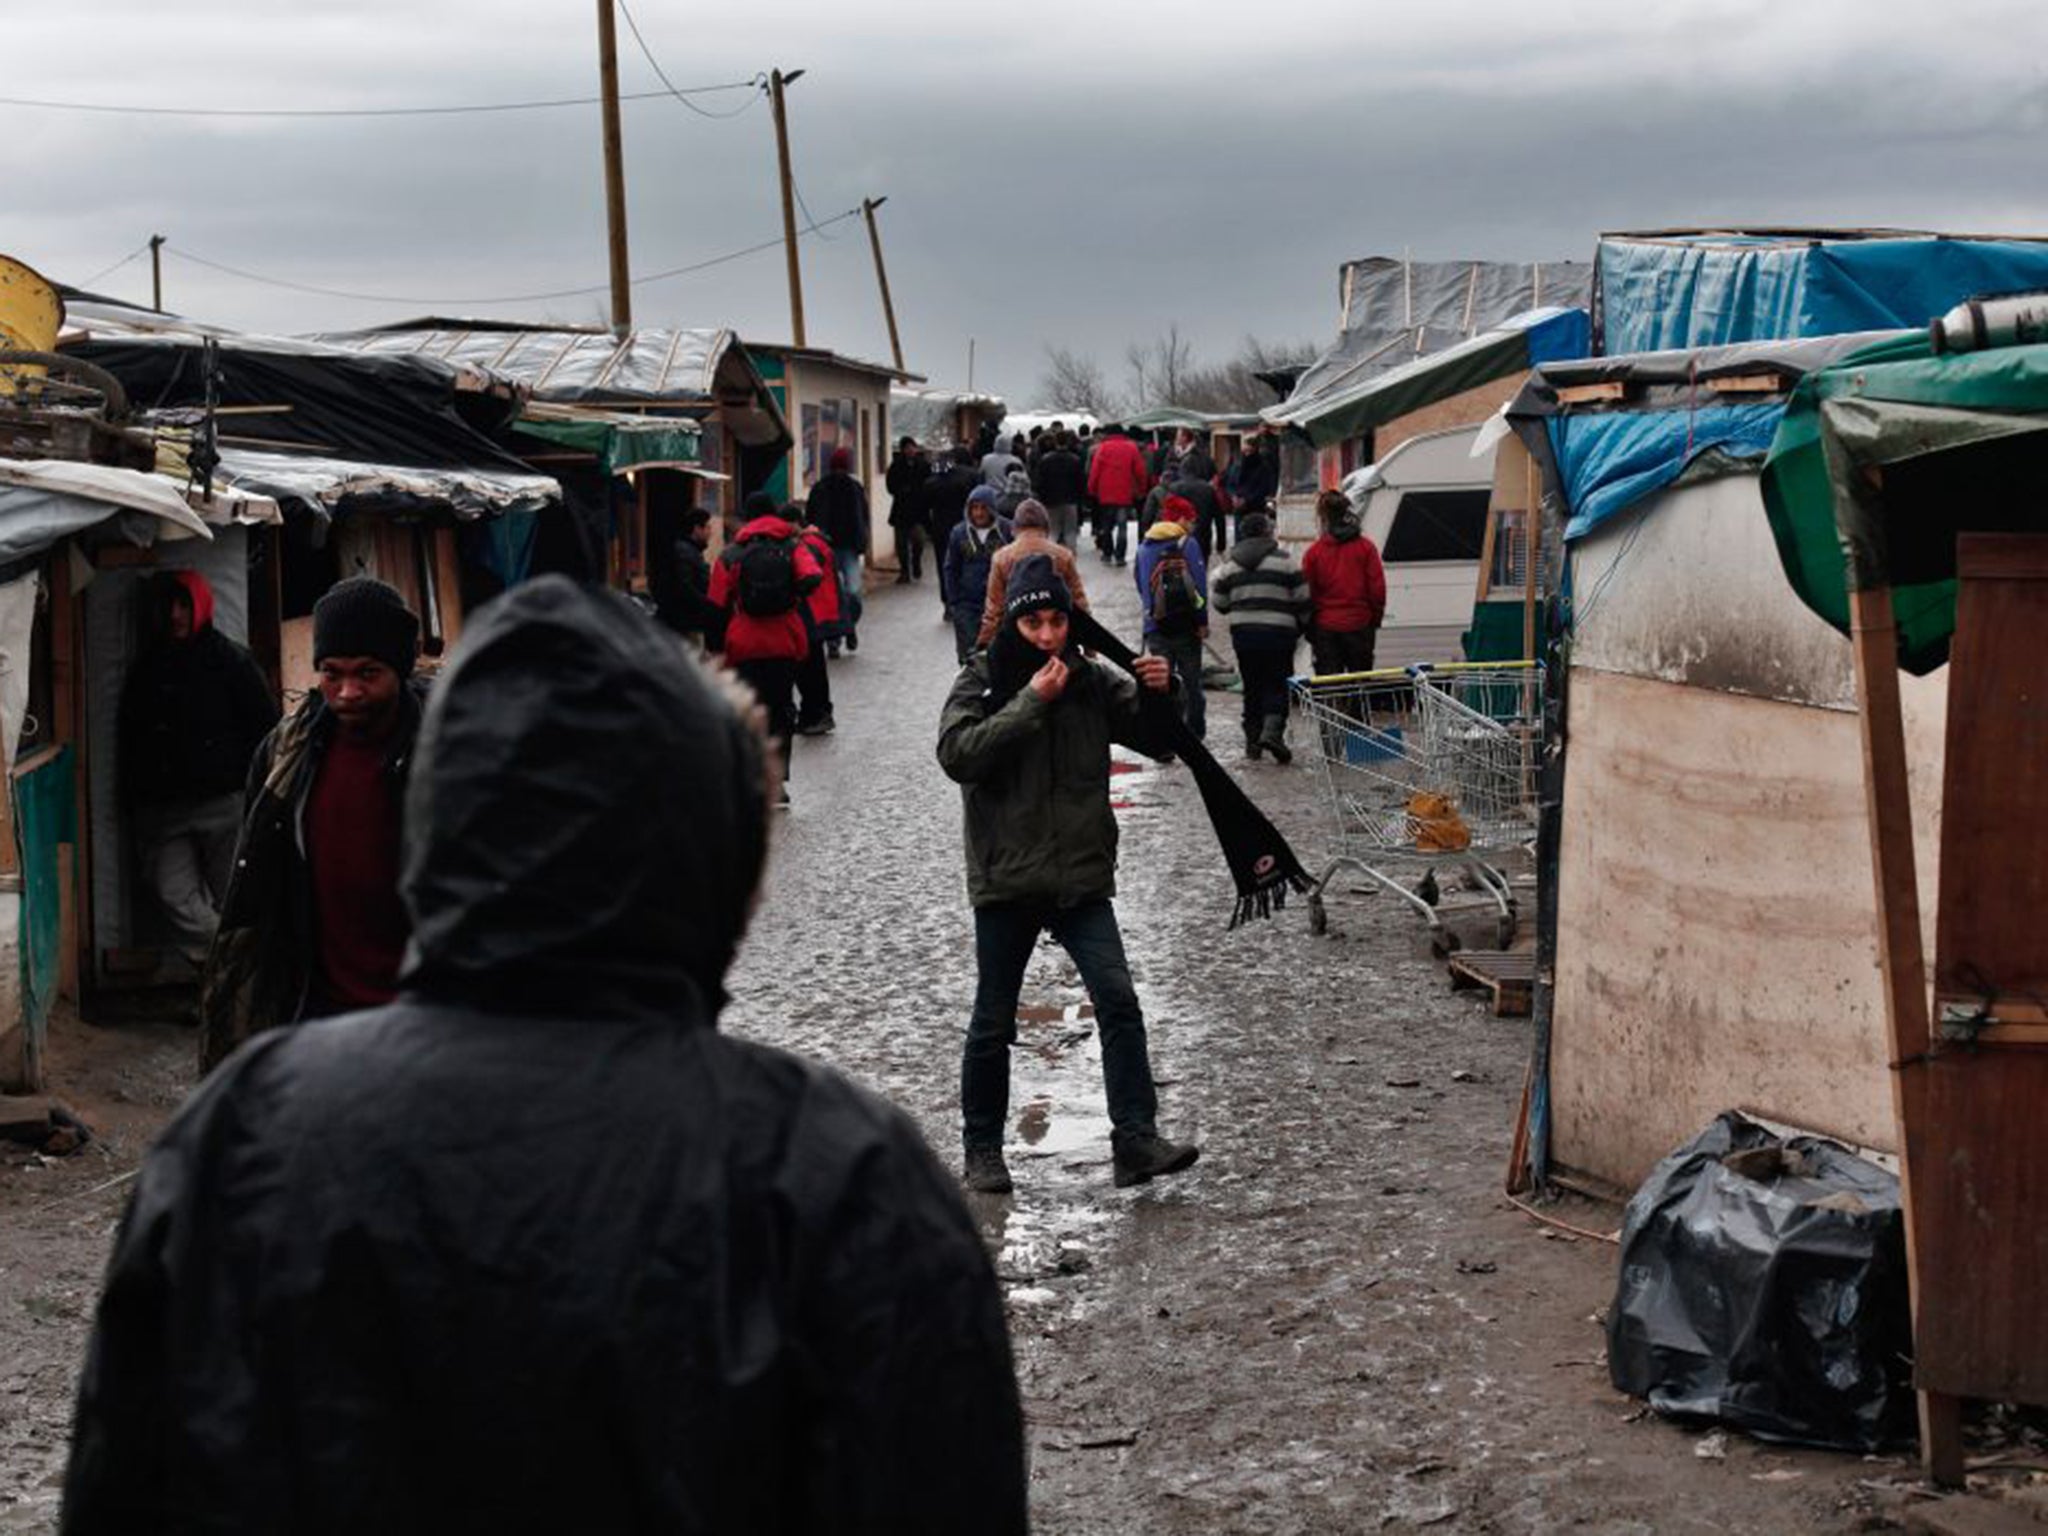 The Jungle Camp in Calais, France